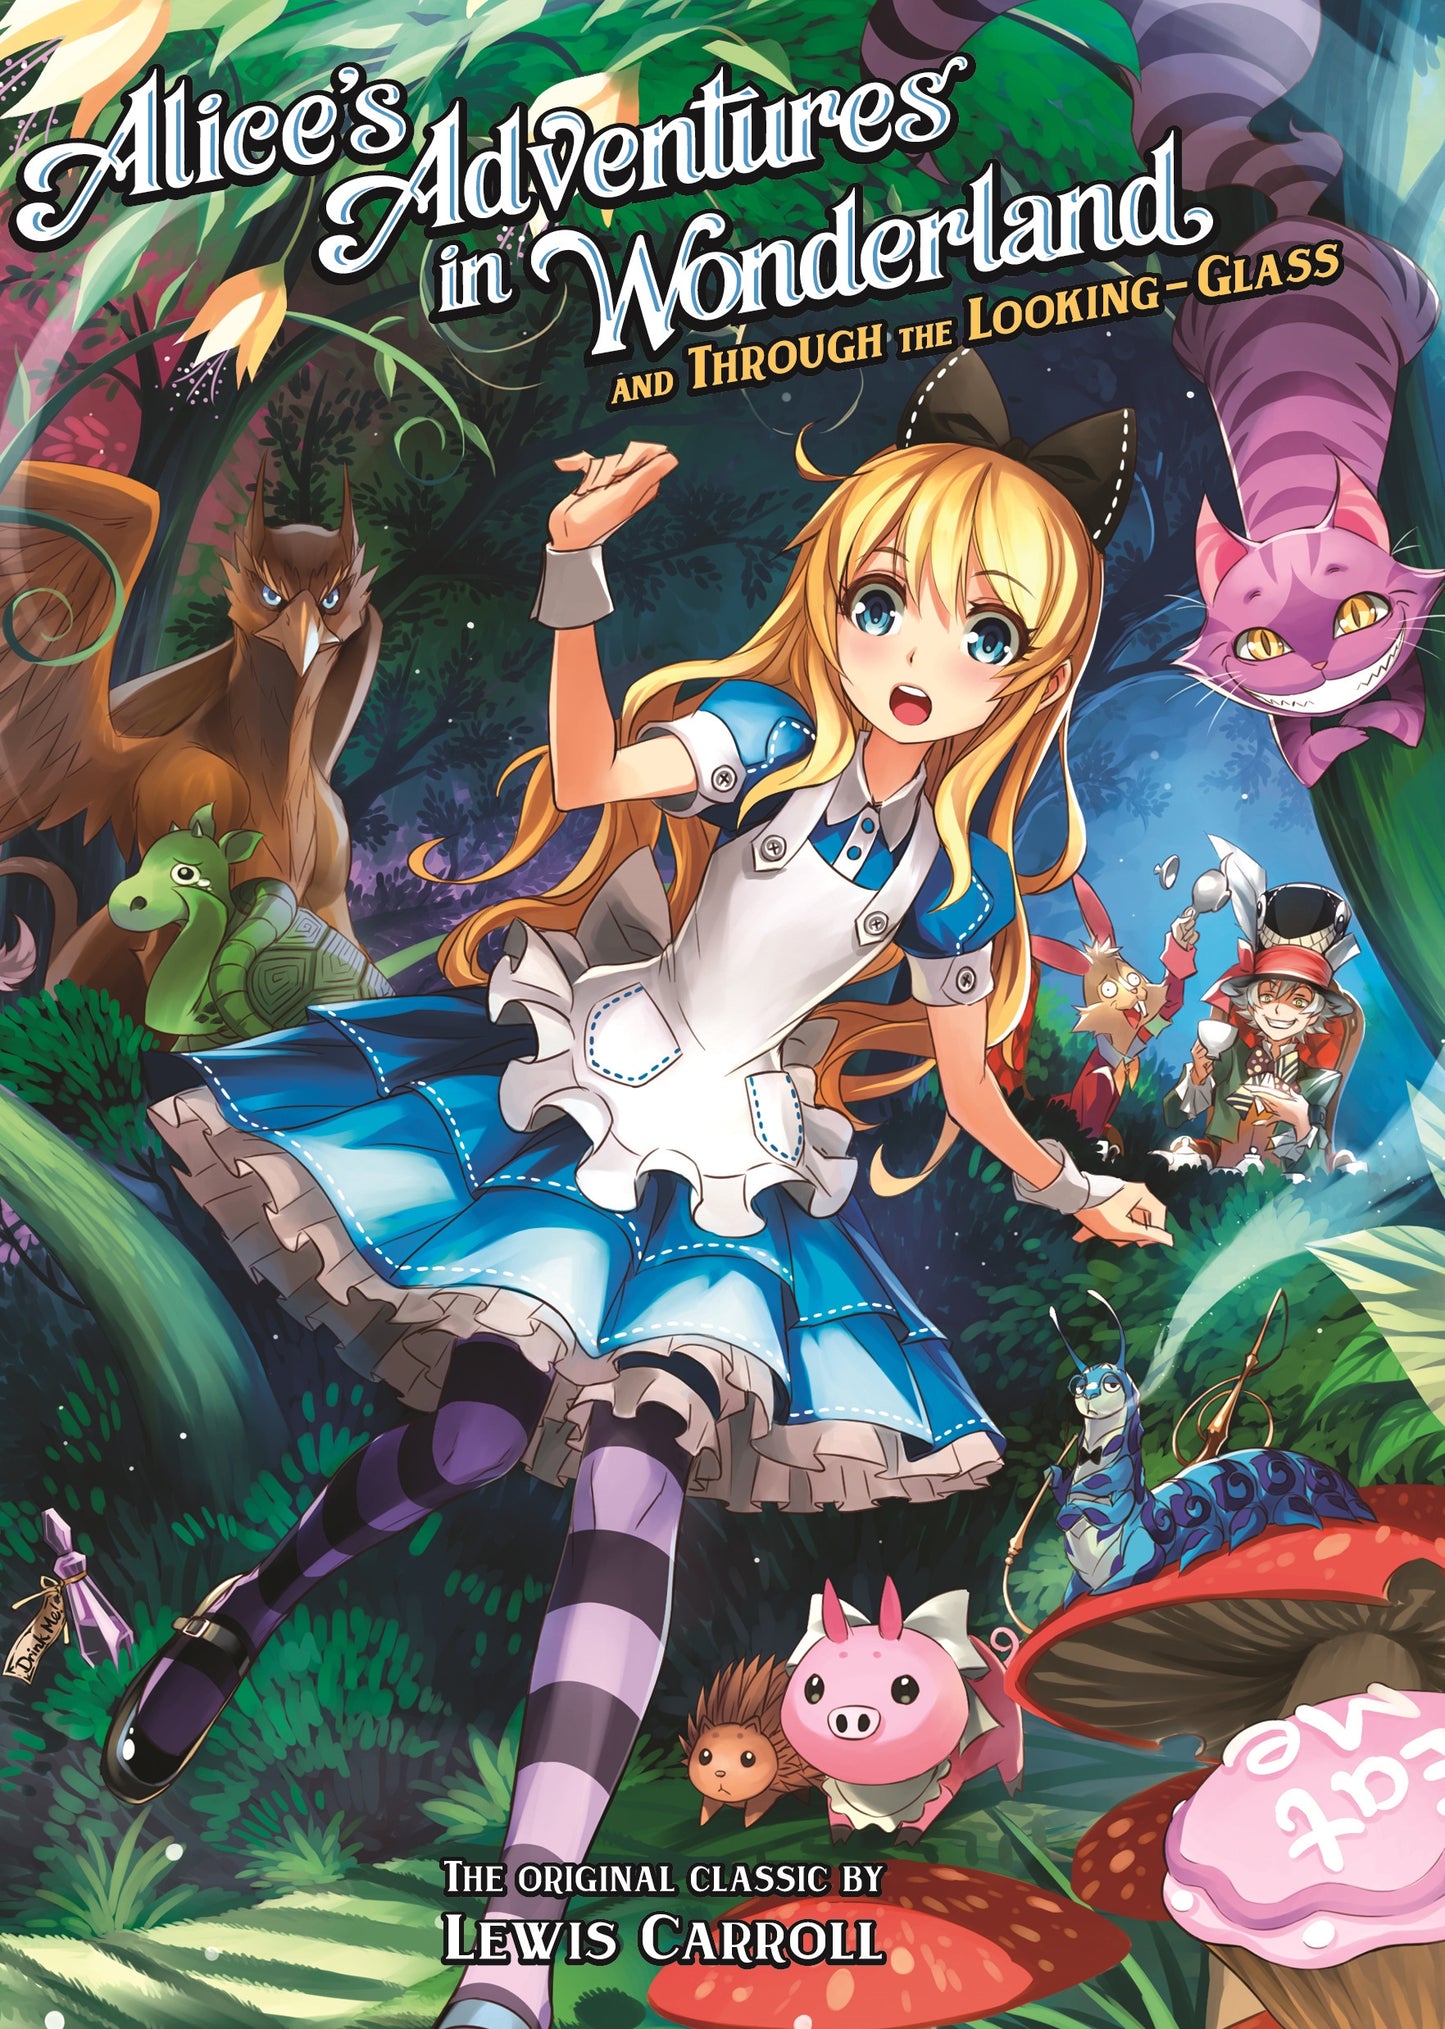 Alice's Adventures in Wonderland and Through the Looking Glass (Illustrated Nove l) - Manga Warehouse